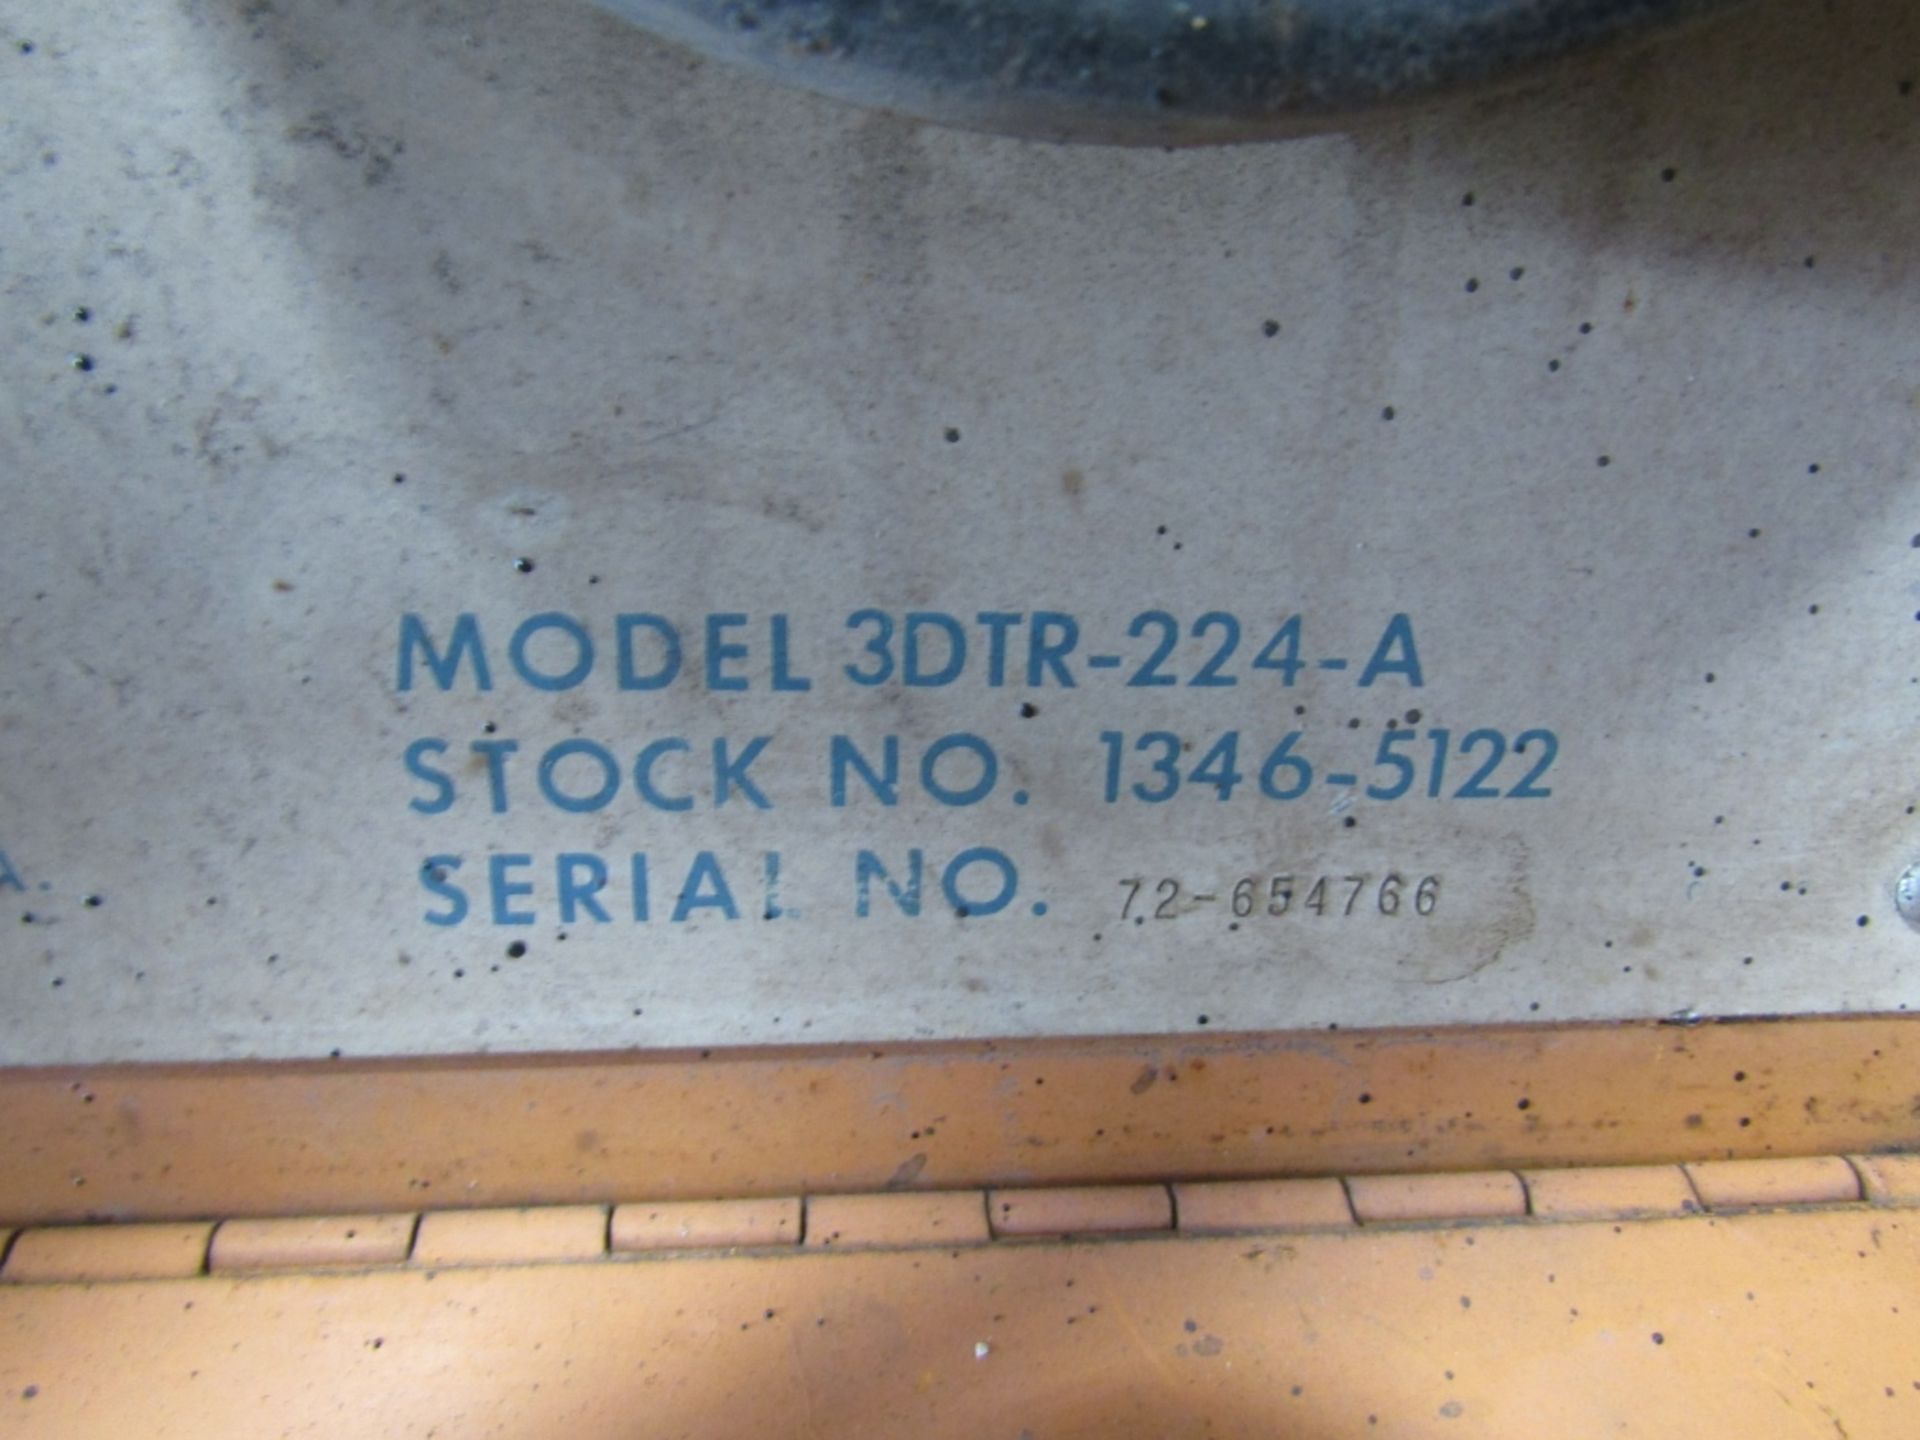 Airco Aircomatic C.V. Feed Welder, Model 3DTR-224-A, Serial #72-654766, - Image 3 of 5